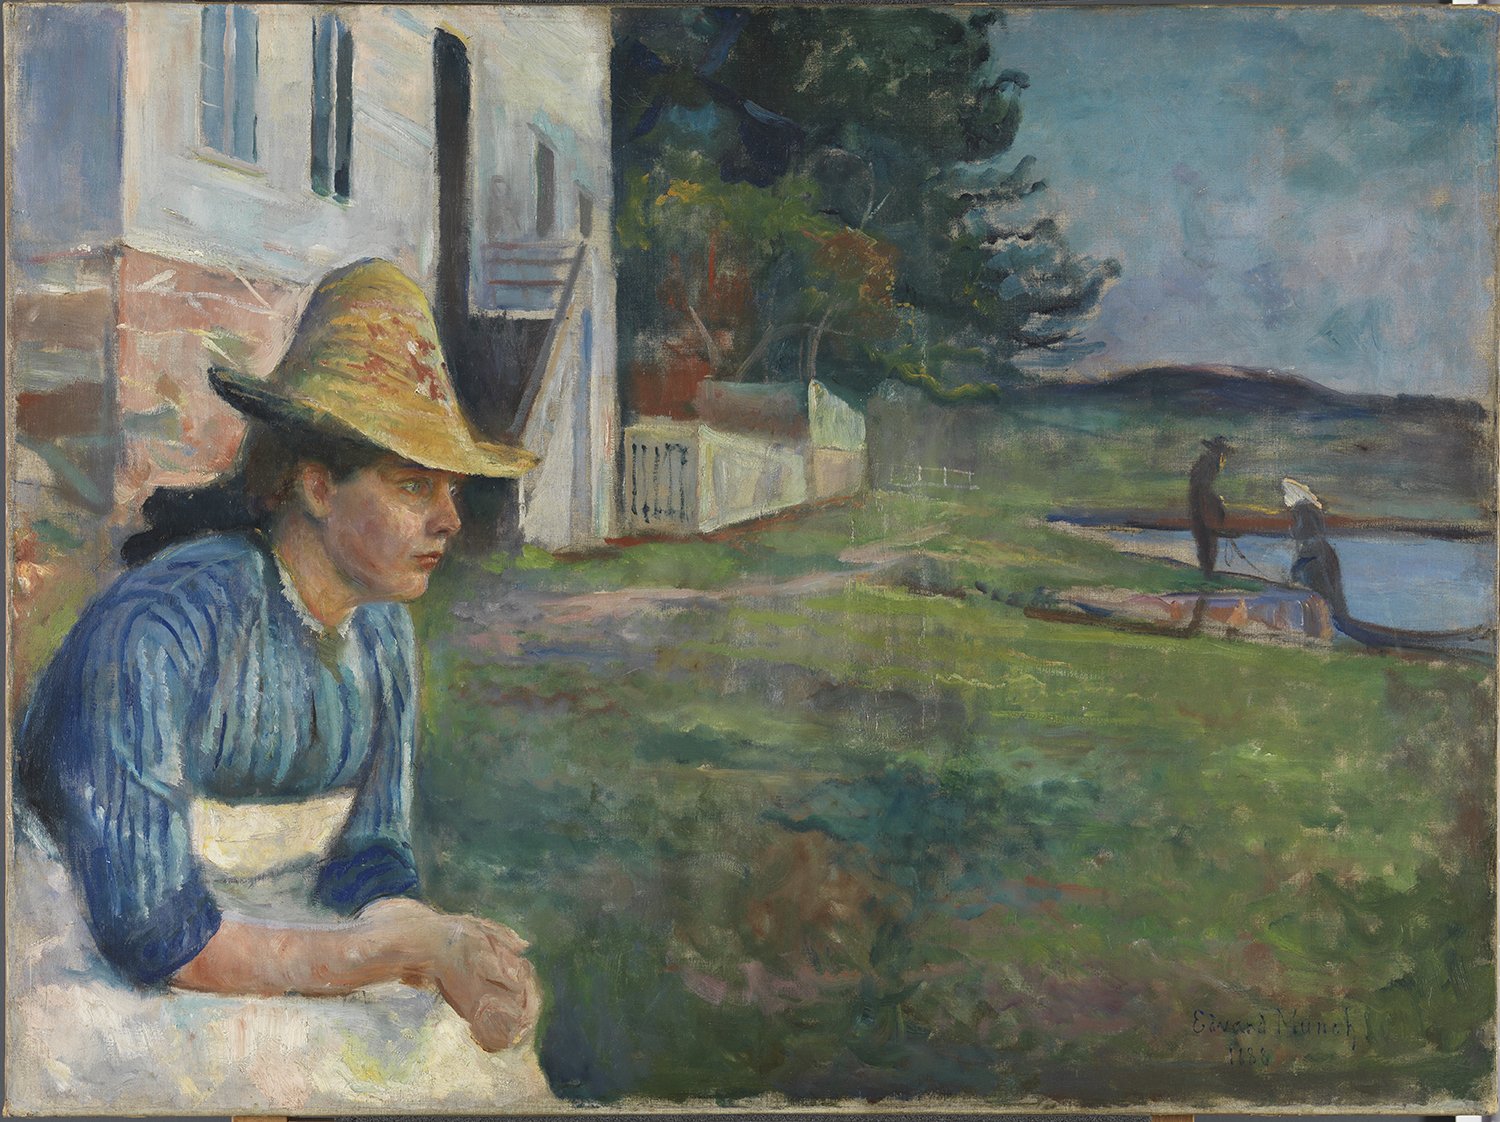 Visible image of Munch's painting "Evening"